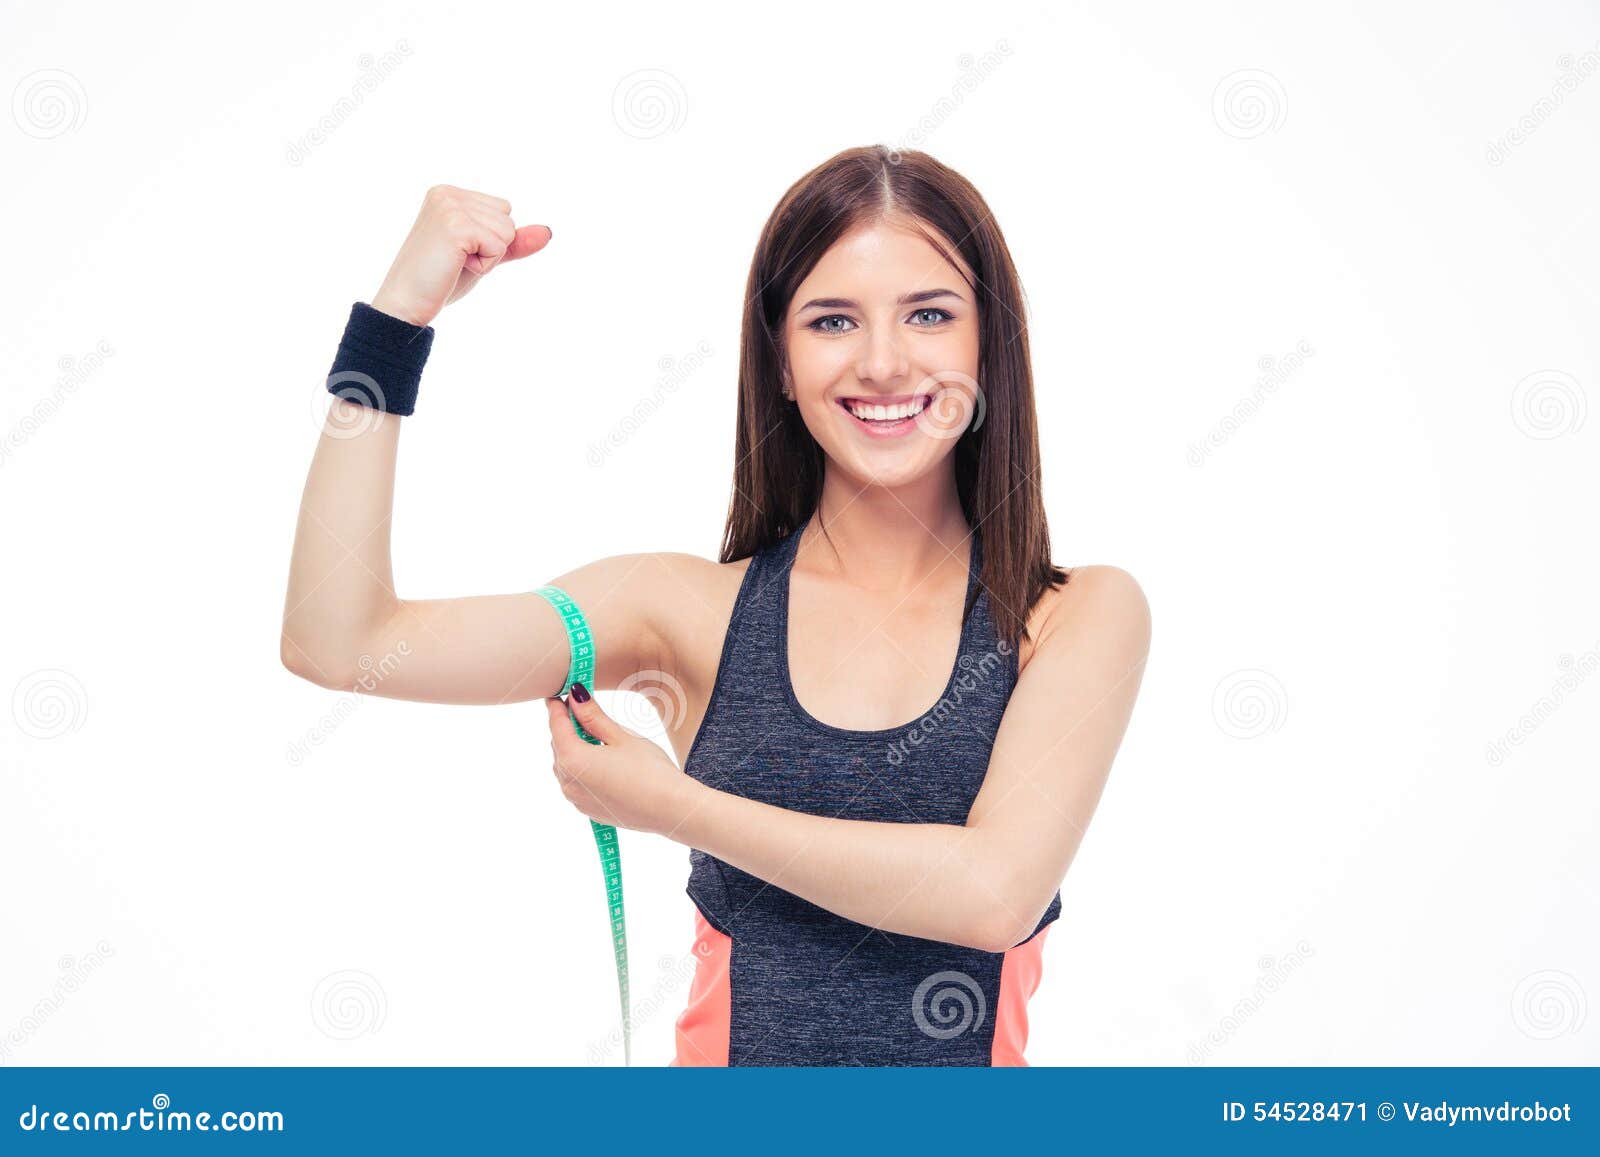 260+ Female Biceps Measurement Stock Photos, Pictures & Royalty